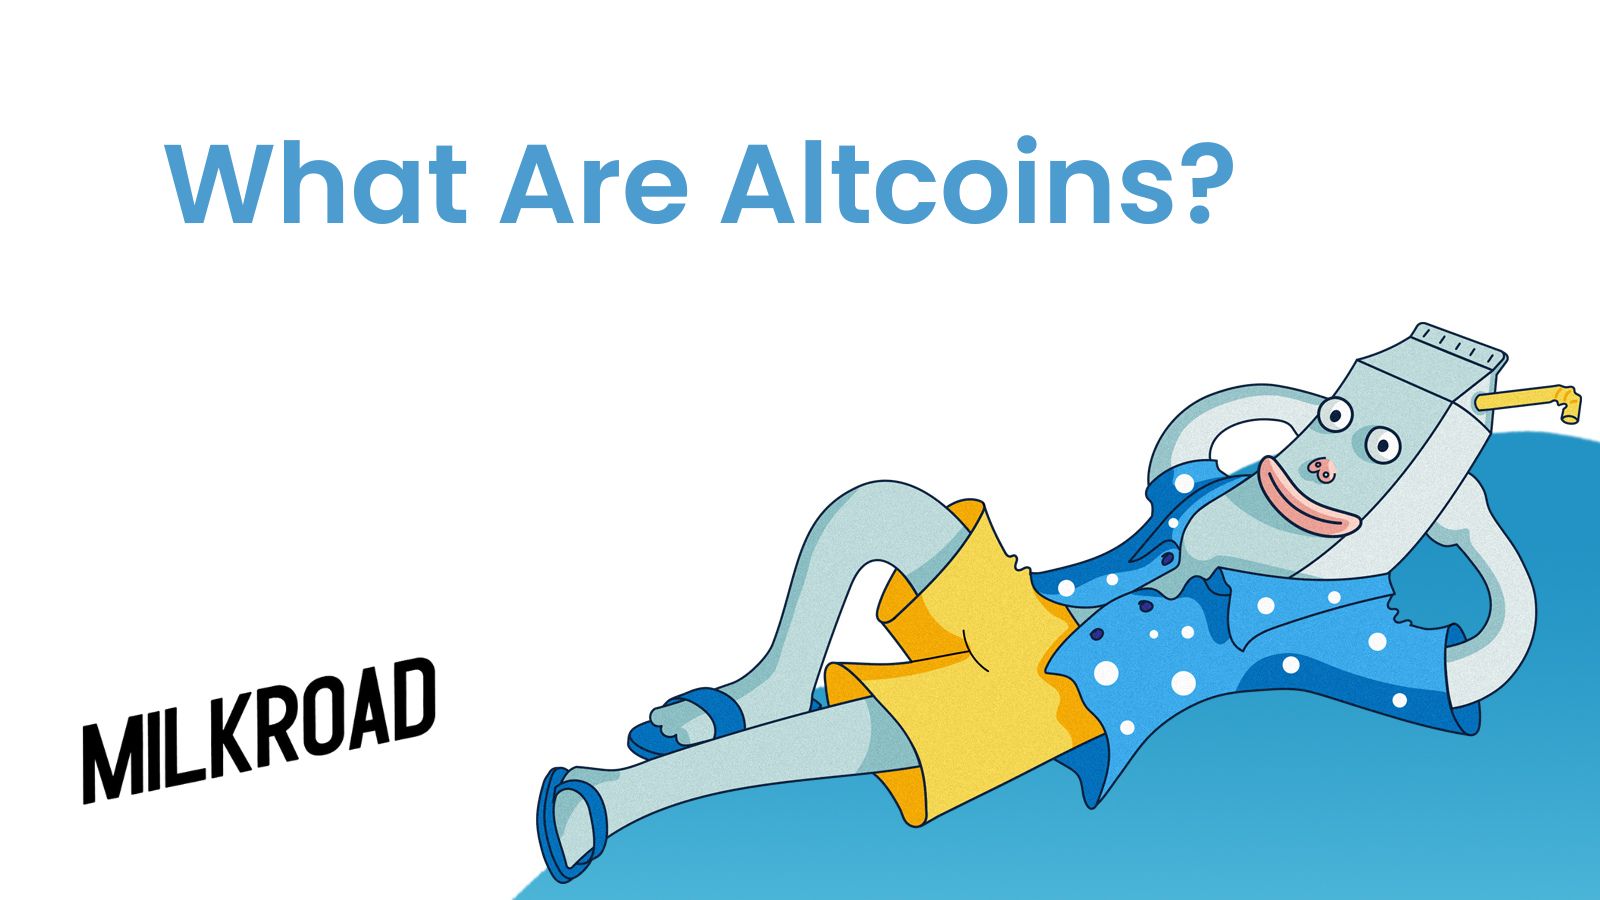 What Are Altcoins?